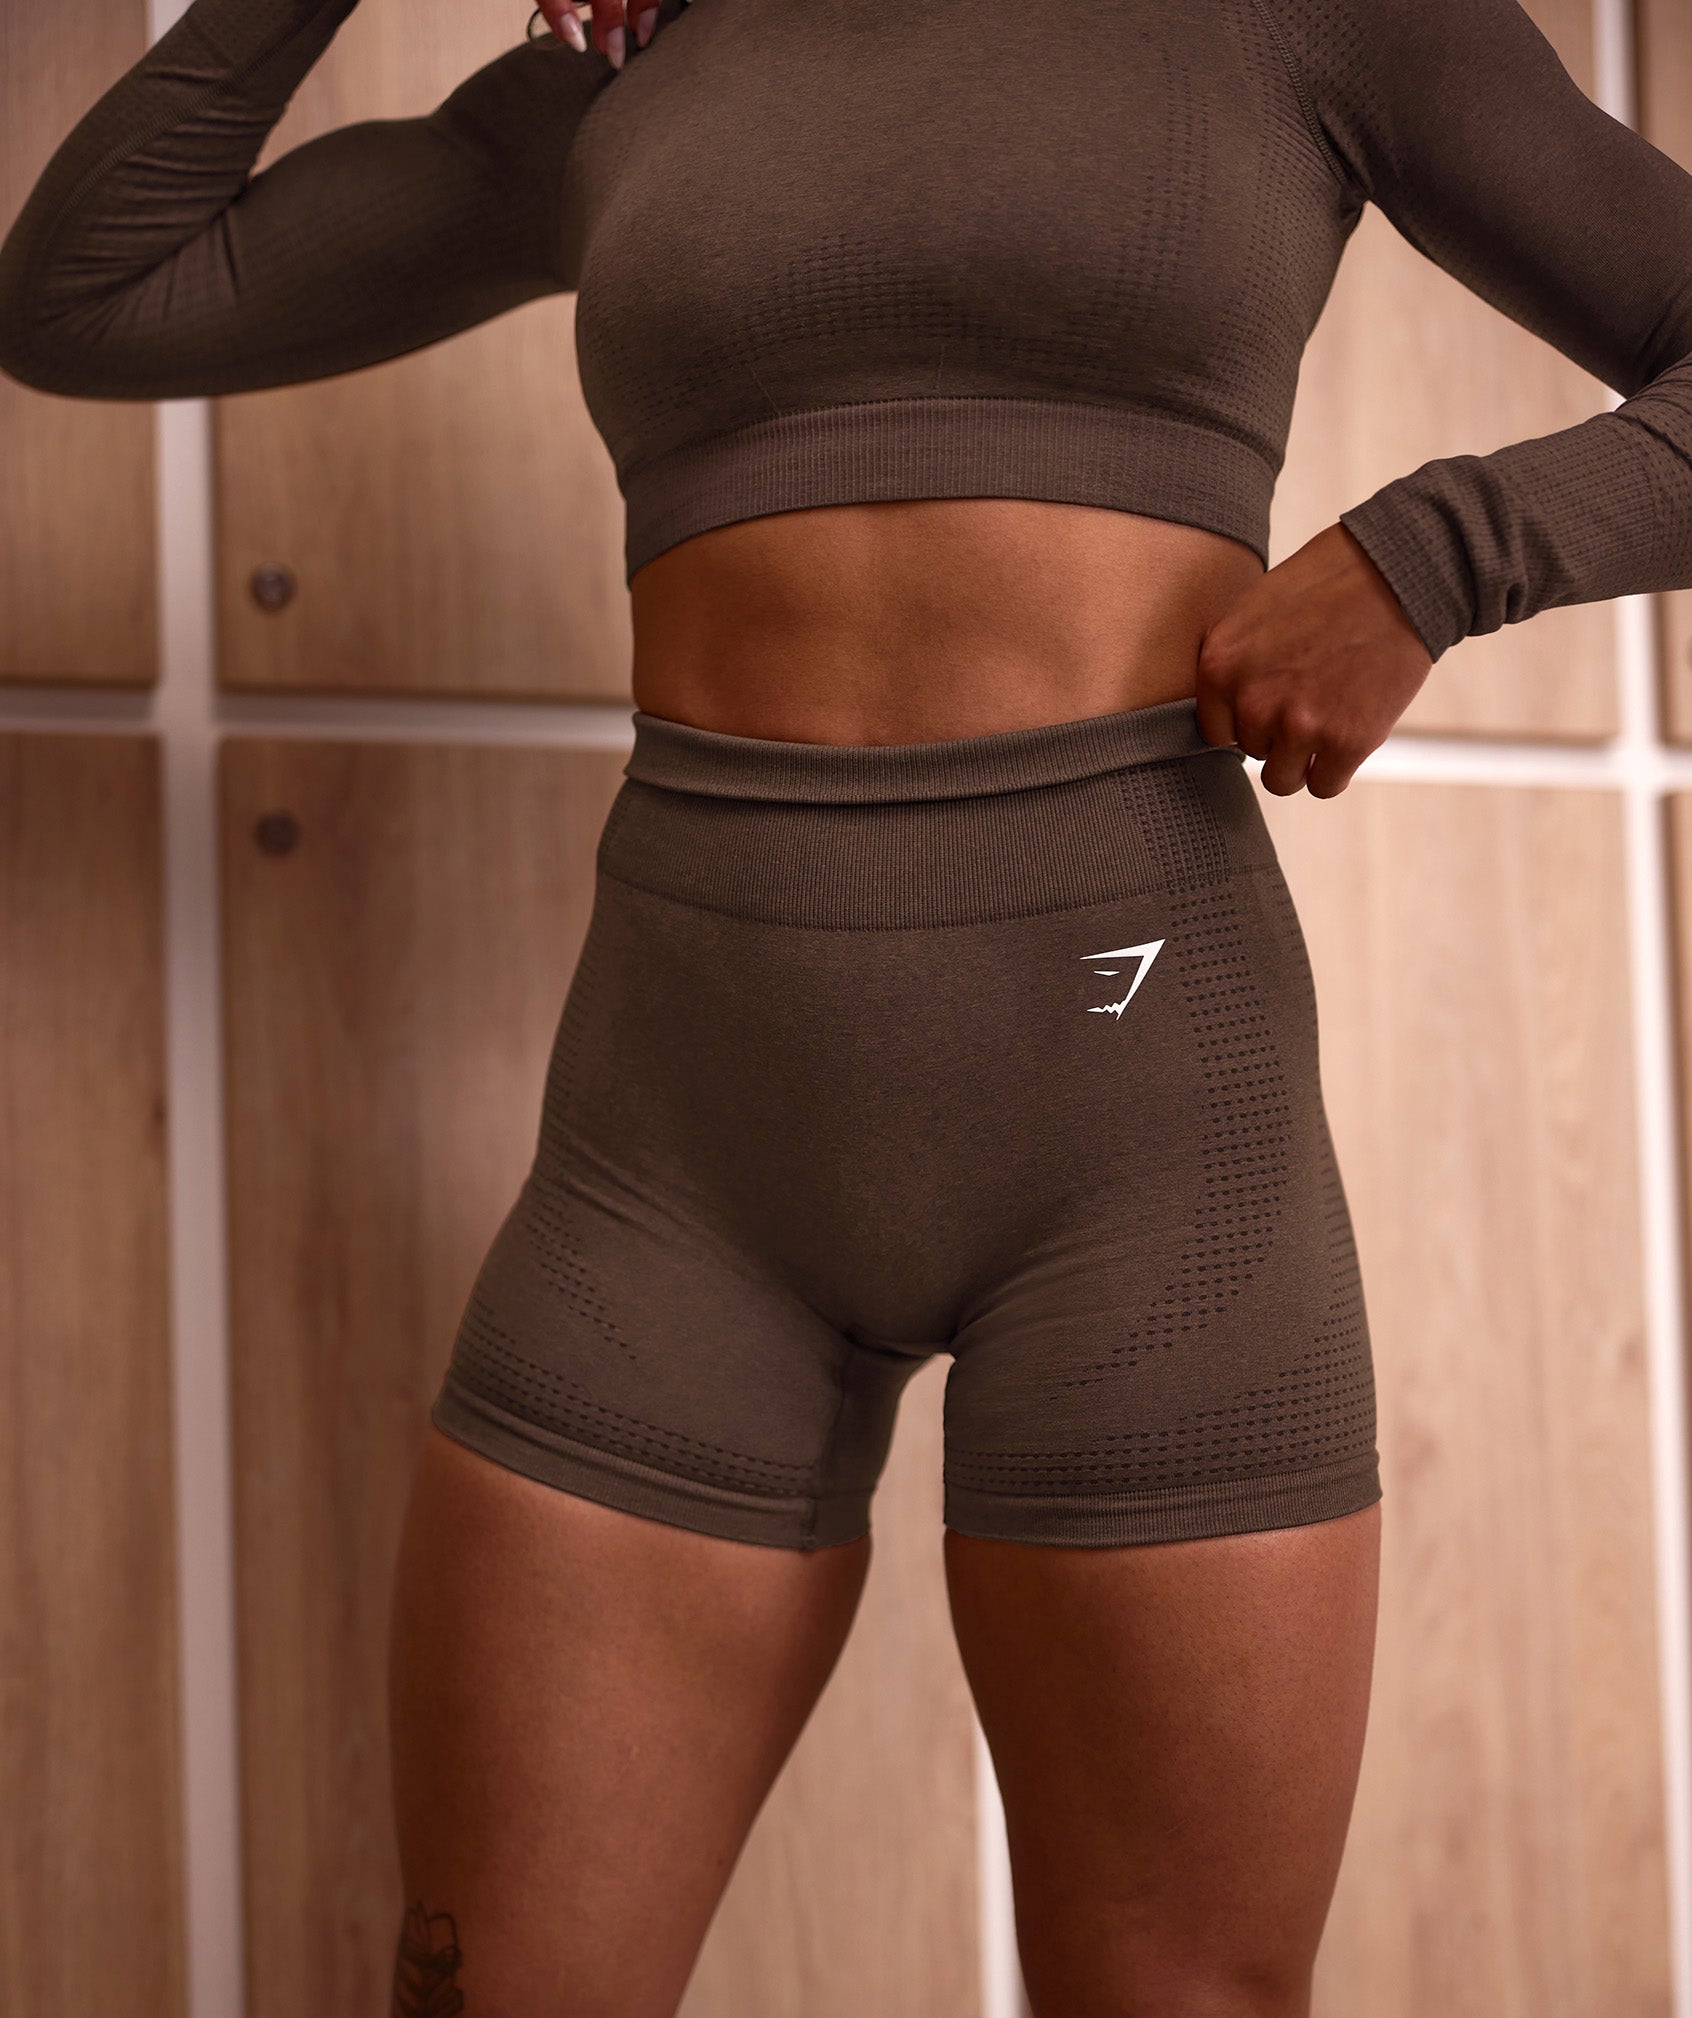 Stay stylish and comfortable with Gymshark Vital Seamless Shorts